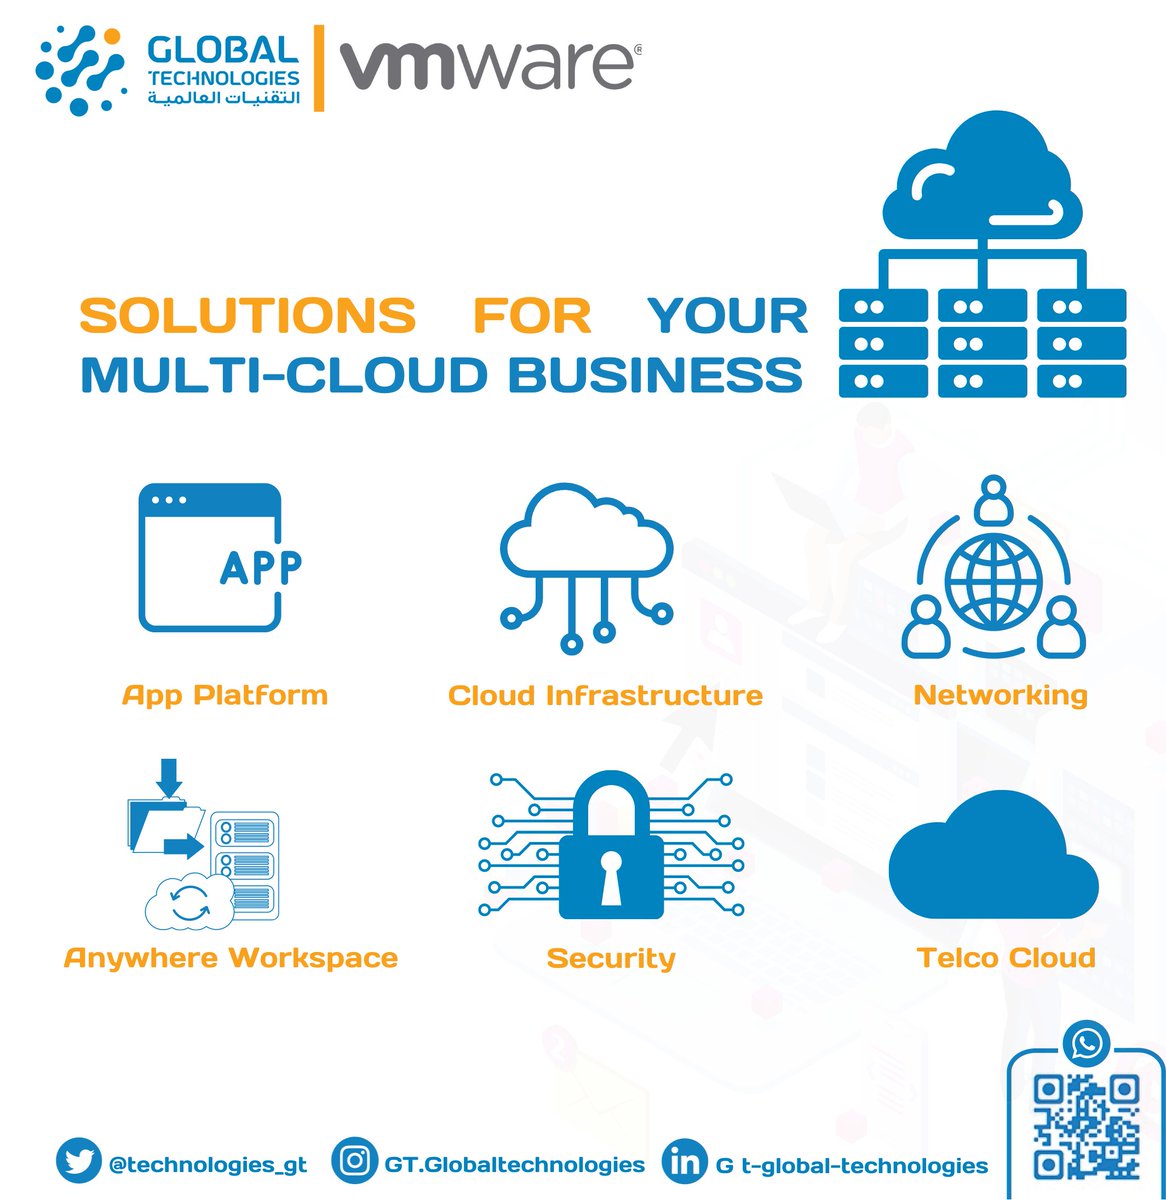 Move fast & be free in the multi-cloud world with VMware & Global Technologies!
1️⃣ App Platform
2️⃣ Cloud Infrastructure
3️⃣ Networking
4️⃣ Anywhere Workspace:
5️⃣ Security
6️⃣ Telco Cloud
#VMware #MultiCloud #Networking #AnywhereWorkspace #Security #TelcoCloud #GlobalTechnologies